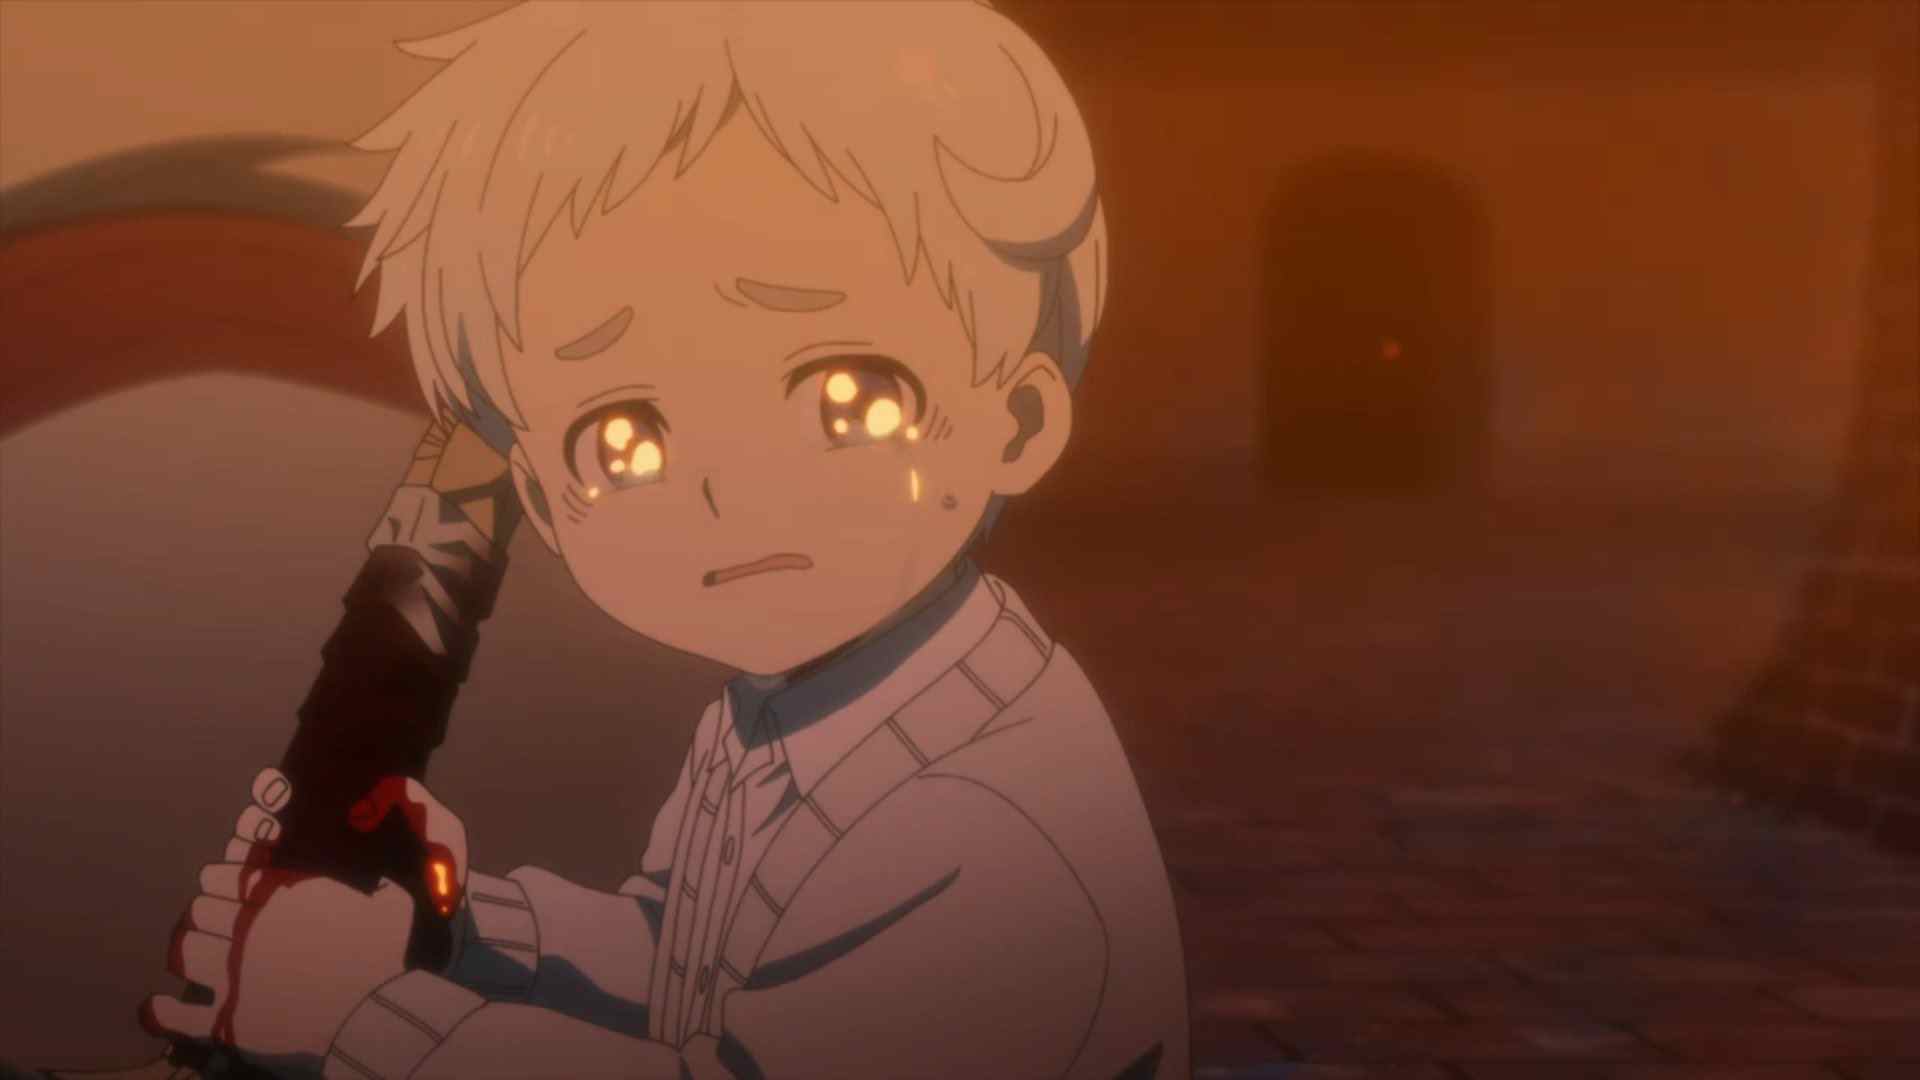 The “Best” Episode of the Season | The Promised Neverland Season 2 Episode 8 Review